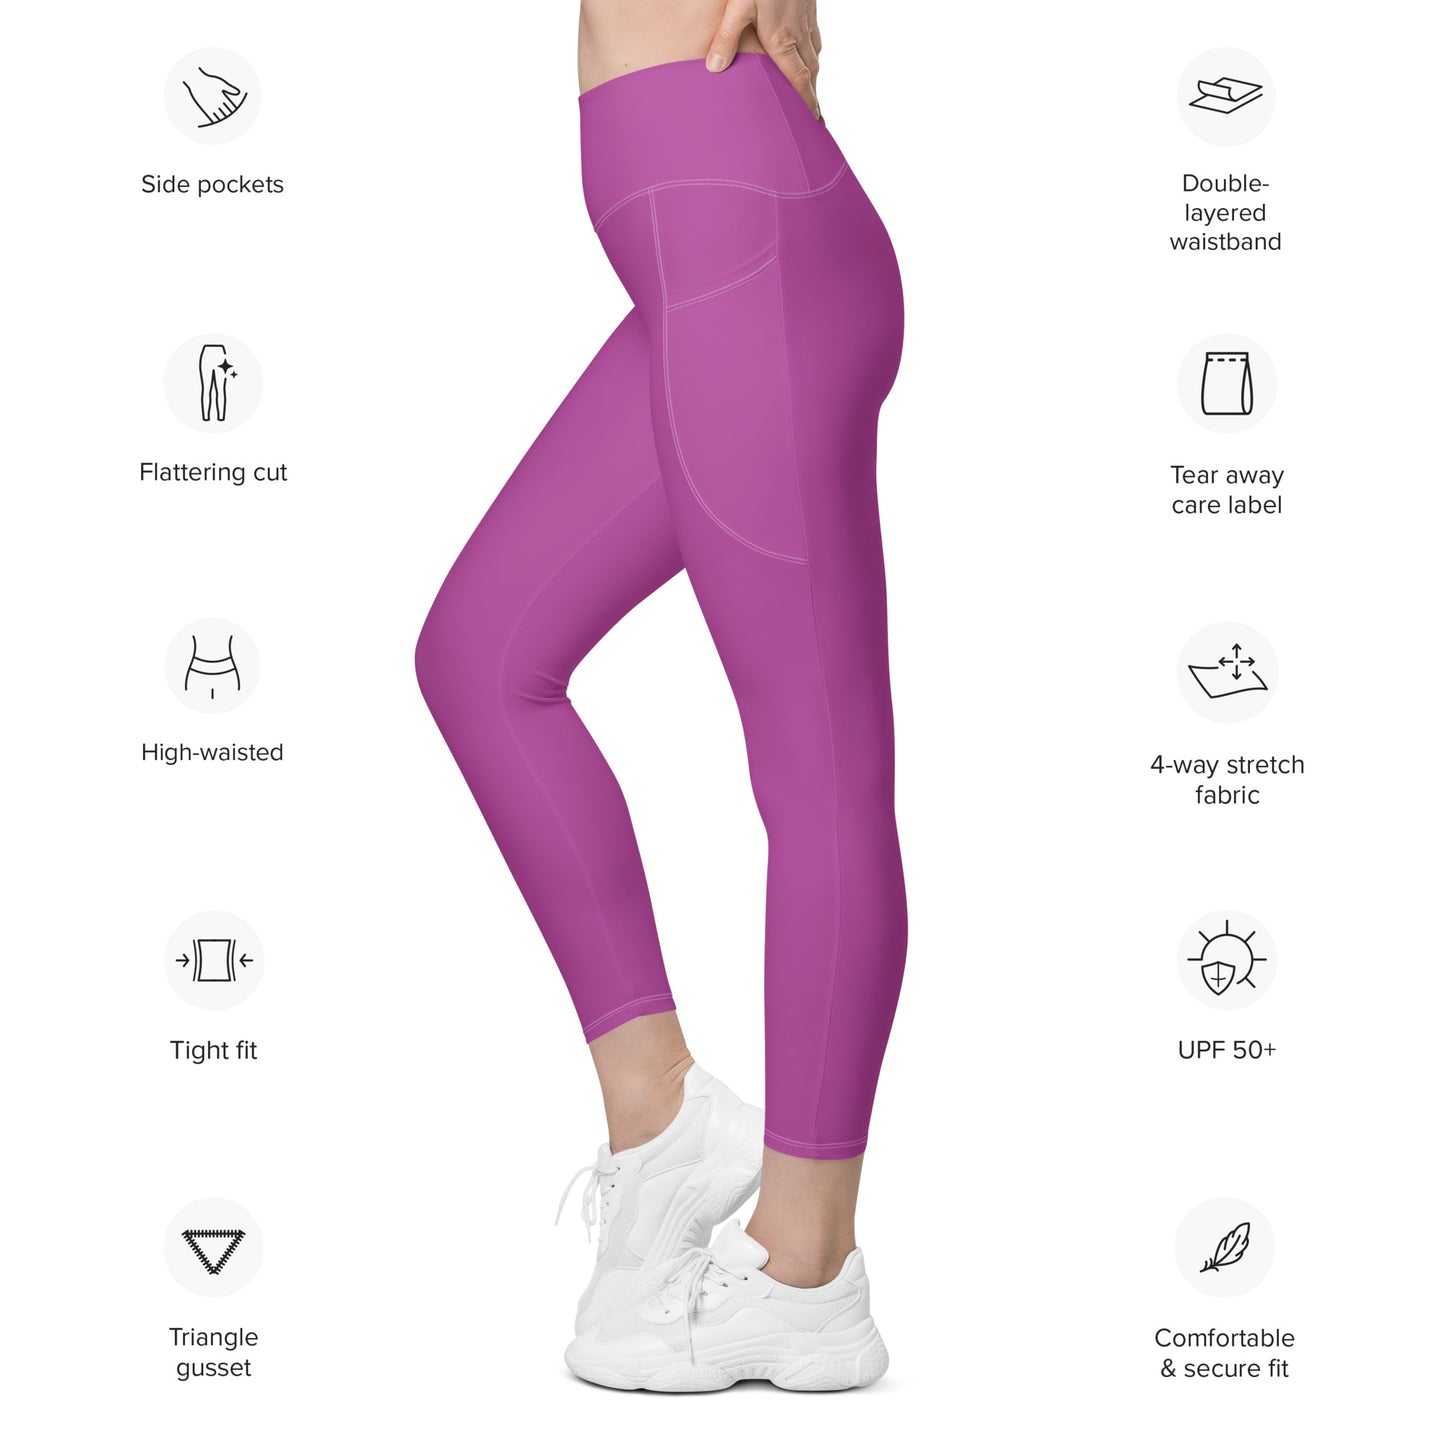 Pilze Solid Color High Waist 7/8 Recycled Yoga Leggings / Yoga Pants with Pockets